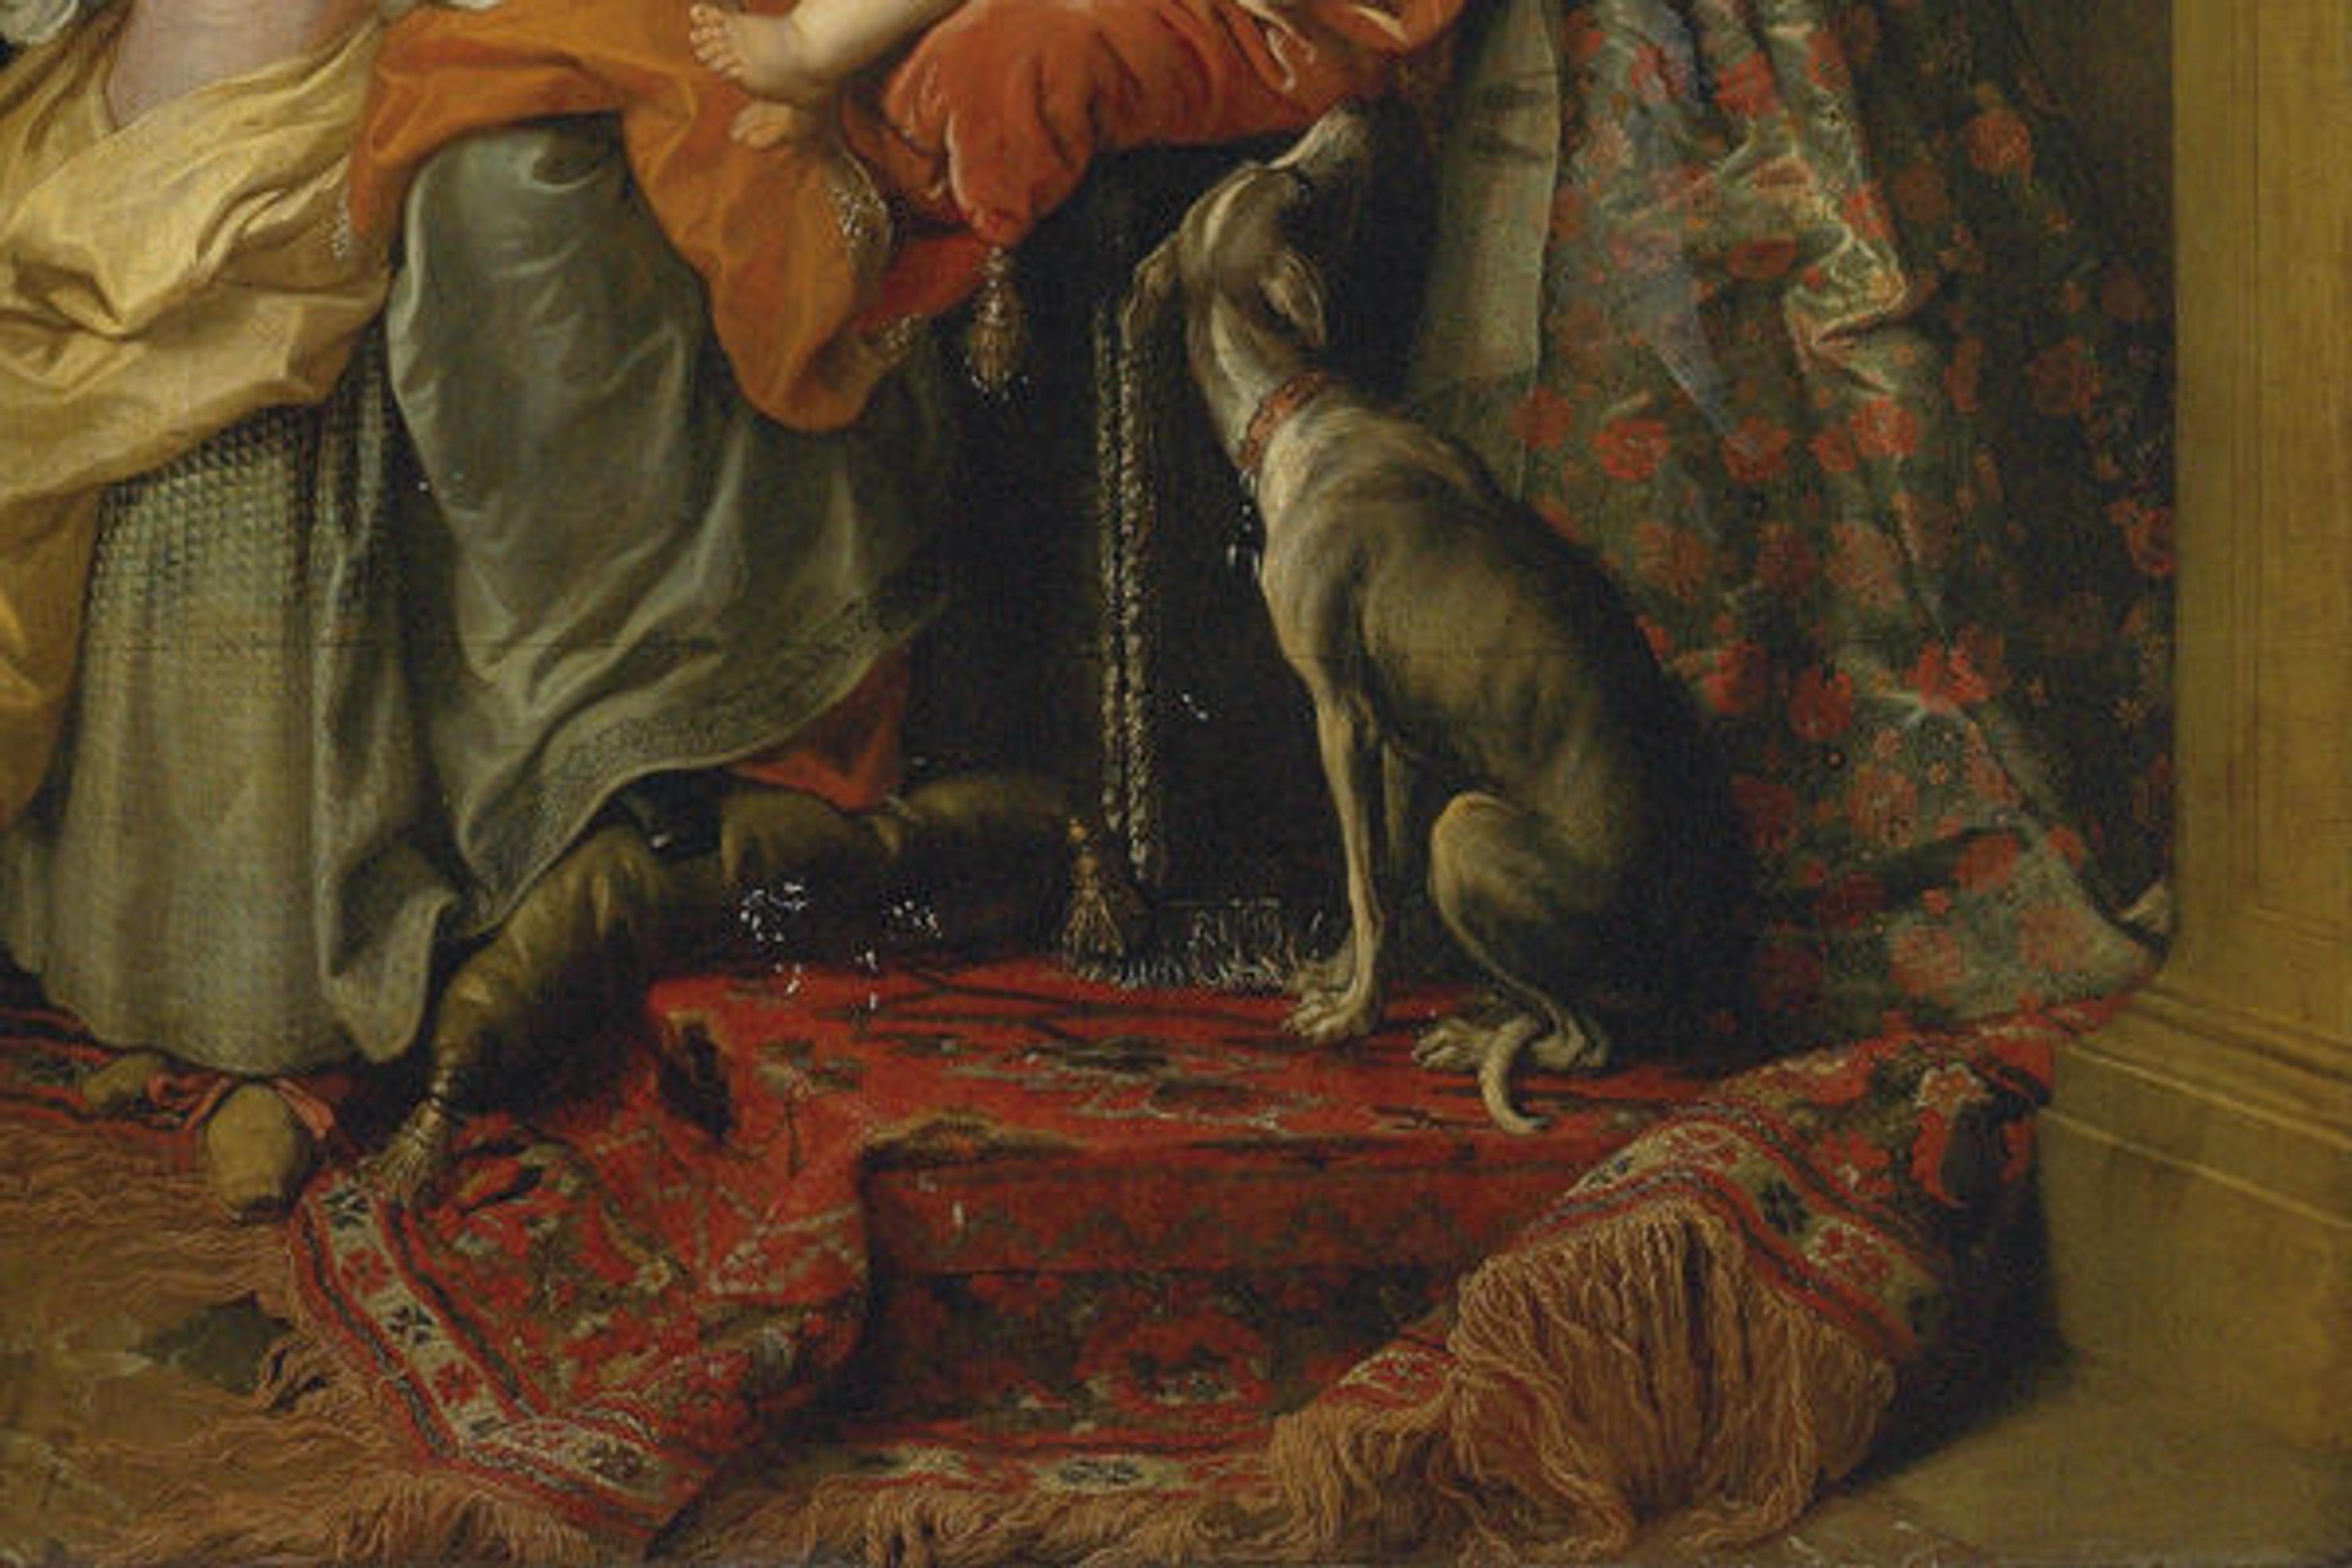 Dog in the Jabach portrait